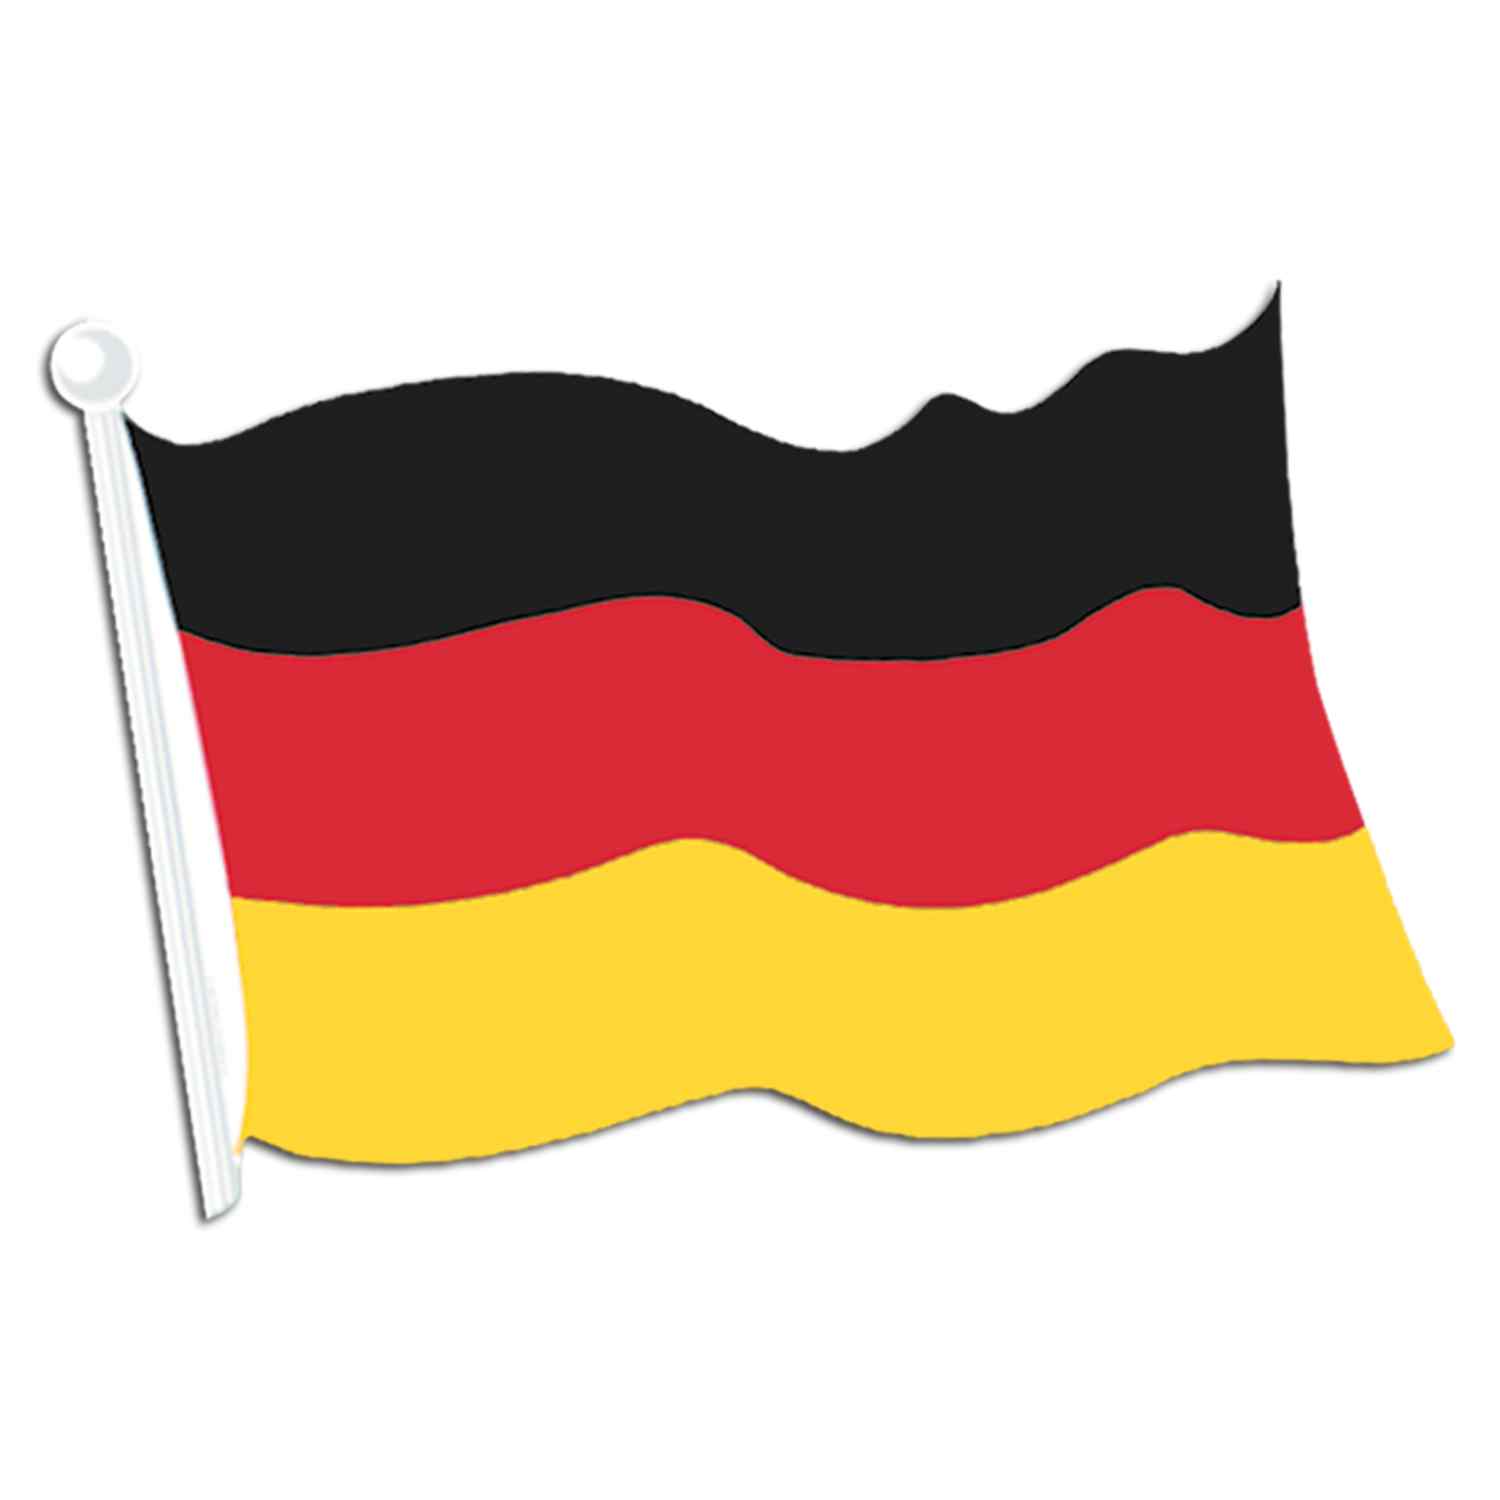 free-picture-of-the-german-flag-download-free-picture-of-the-german